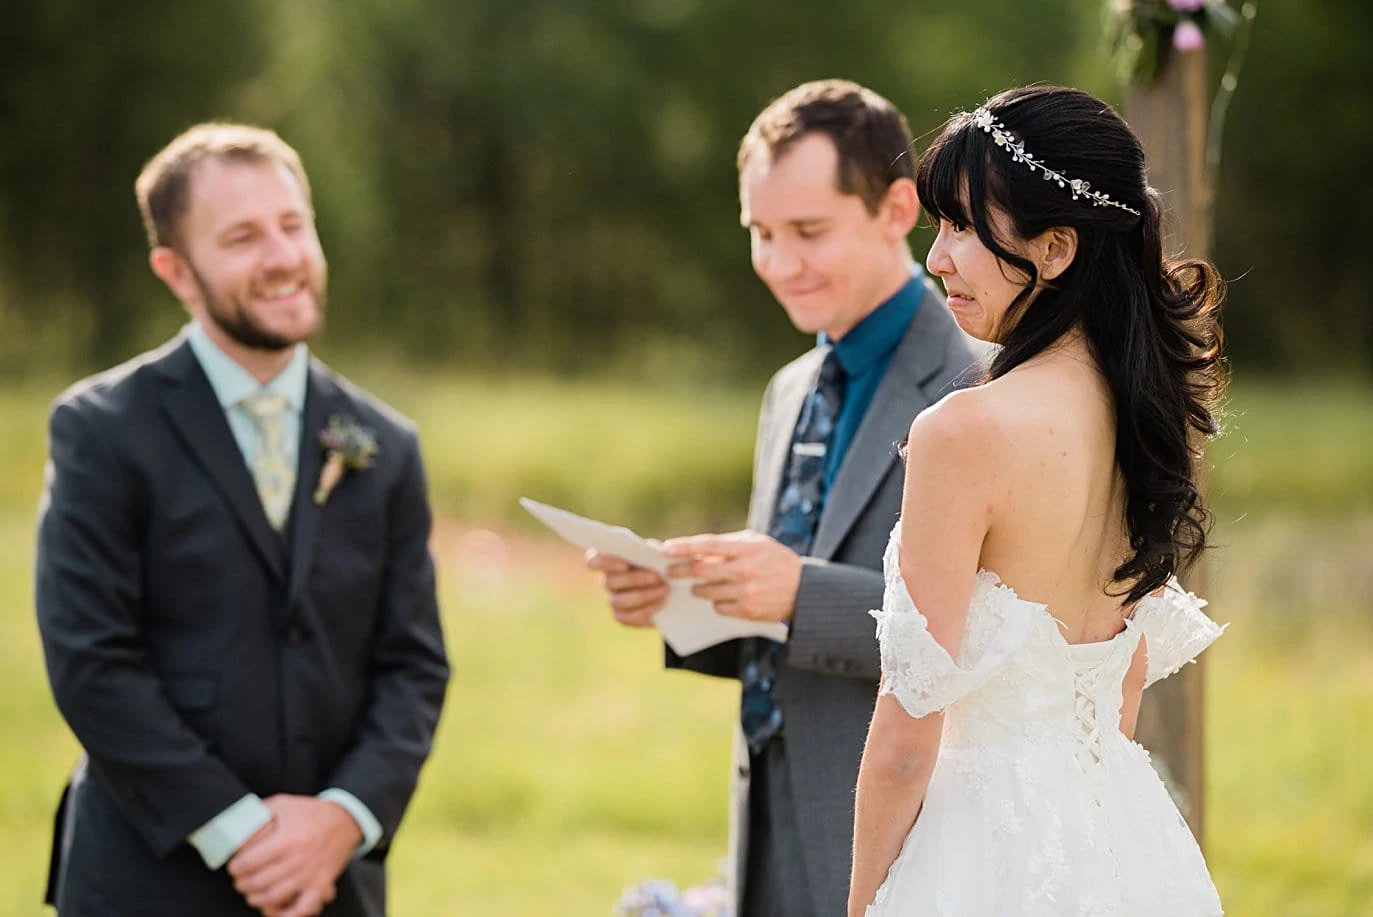 bride and groom share jokes during wedding ceremony at intimate Grand Lake wedding by Denver wedding photographer Jennie Crate